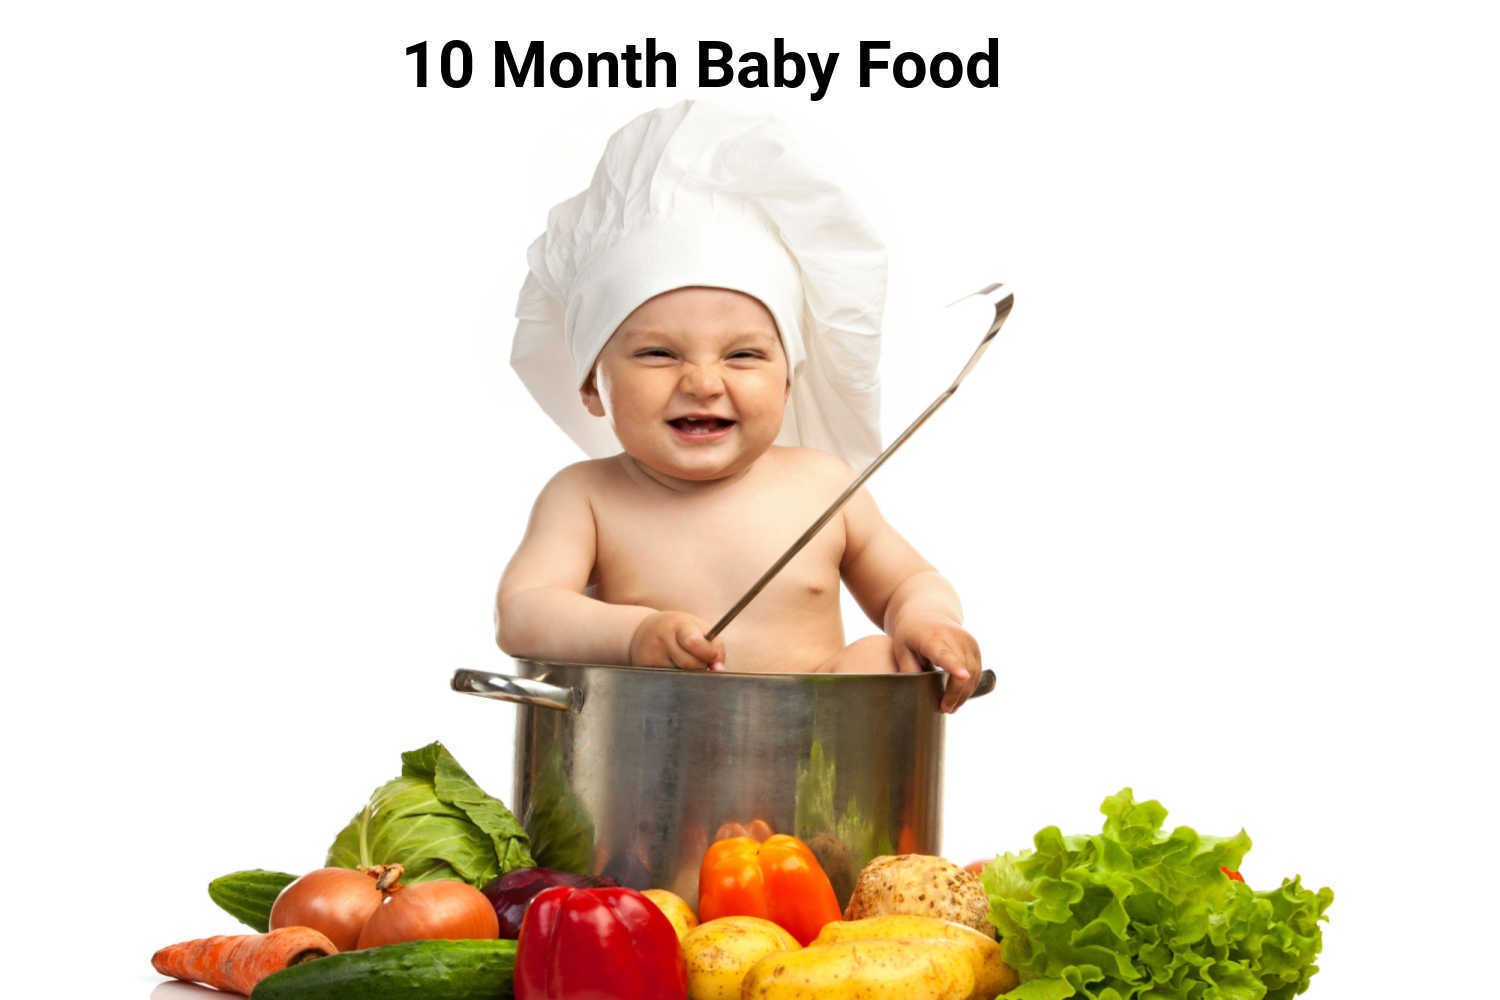 10 month baby food